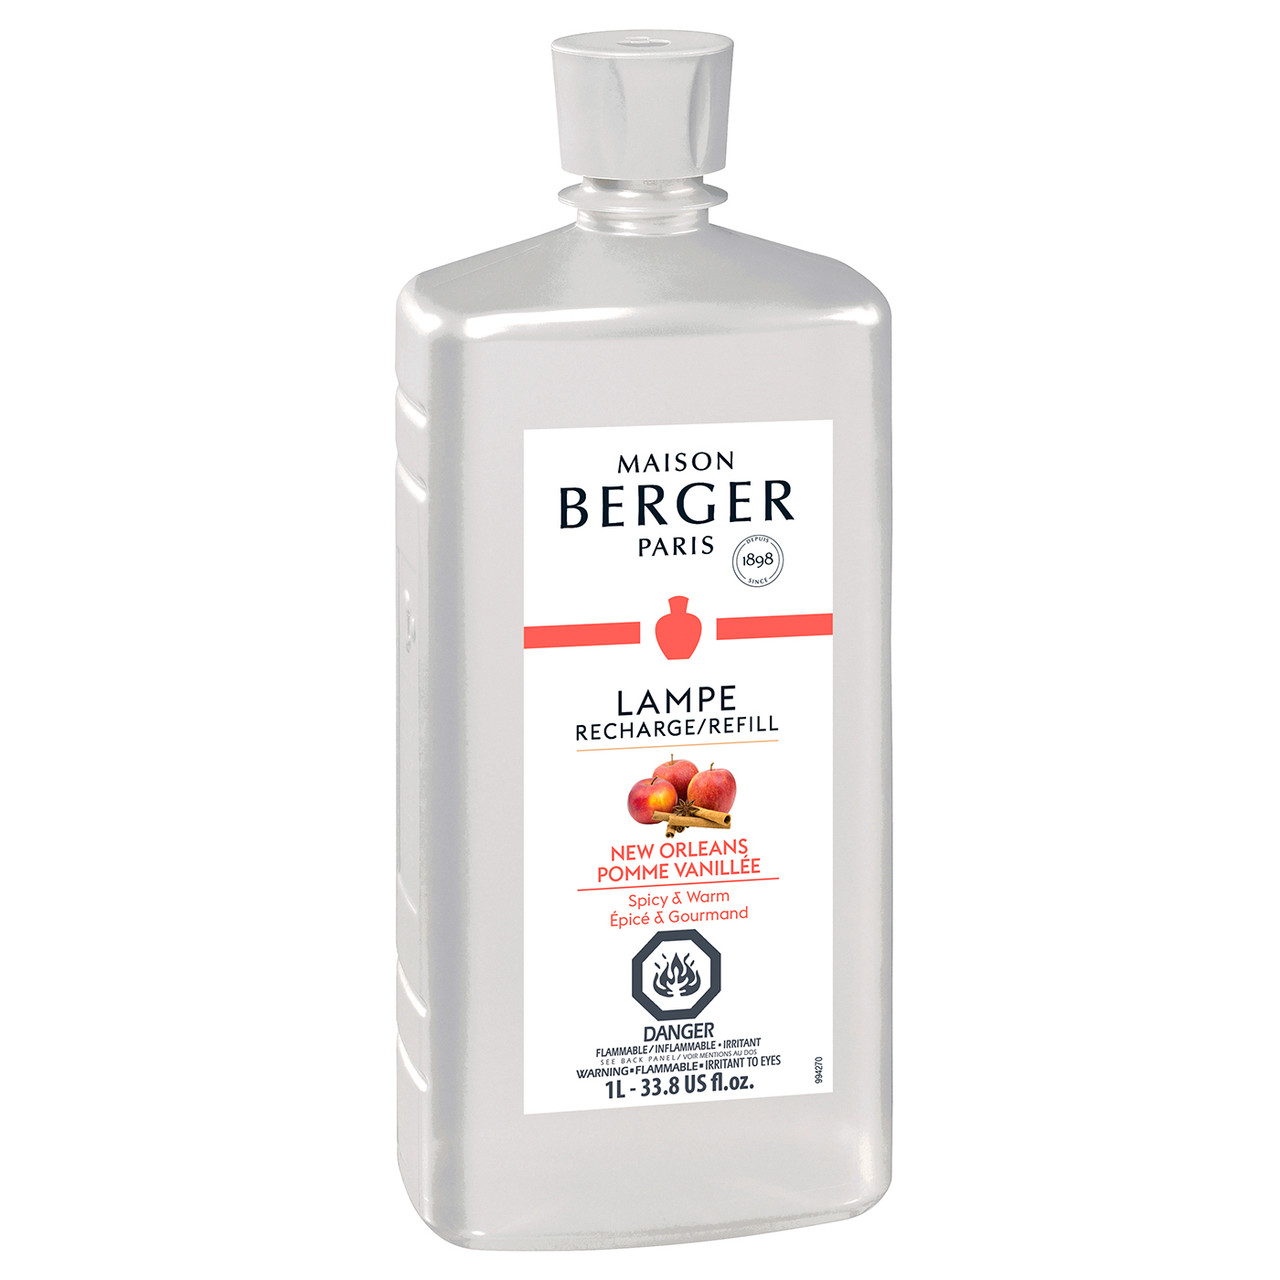 https://cdn11.bigcommerce.com/s-6zwhmb4rdr/images/stencil/1280x1280/products/56563/173417/new-orleans-1-liter-33-8-oz-fragrance-lamp-oil-lampe-berger-by-maison-berger-14__97625.1626027271.jpg?c=1